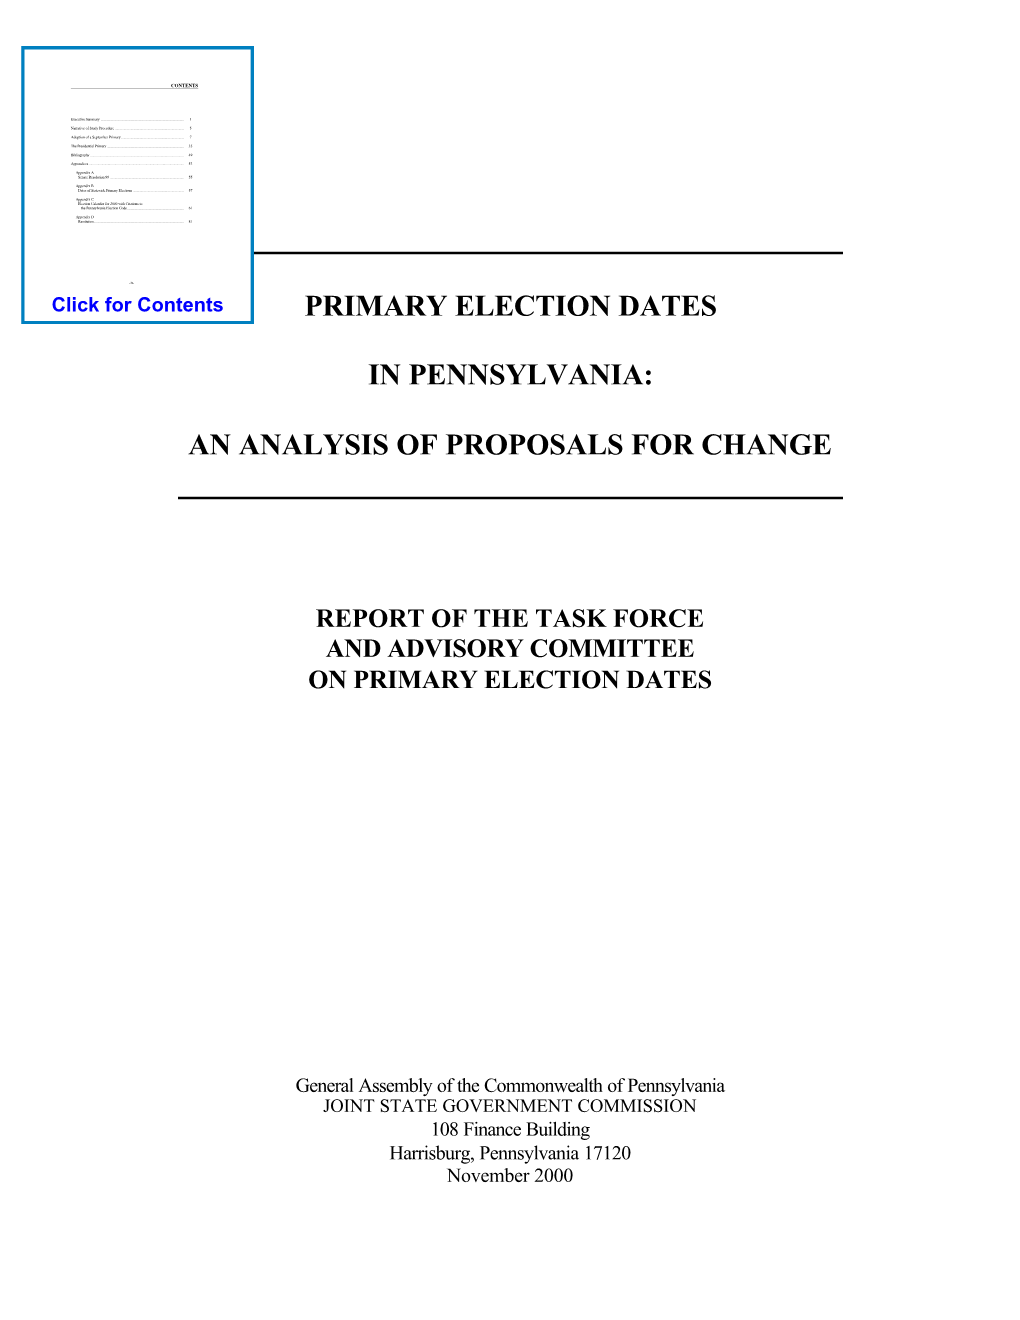 Primary Election Dates in Pennsylvania: an Analysis of Proposals for Change